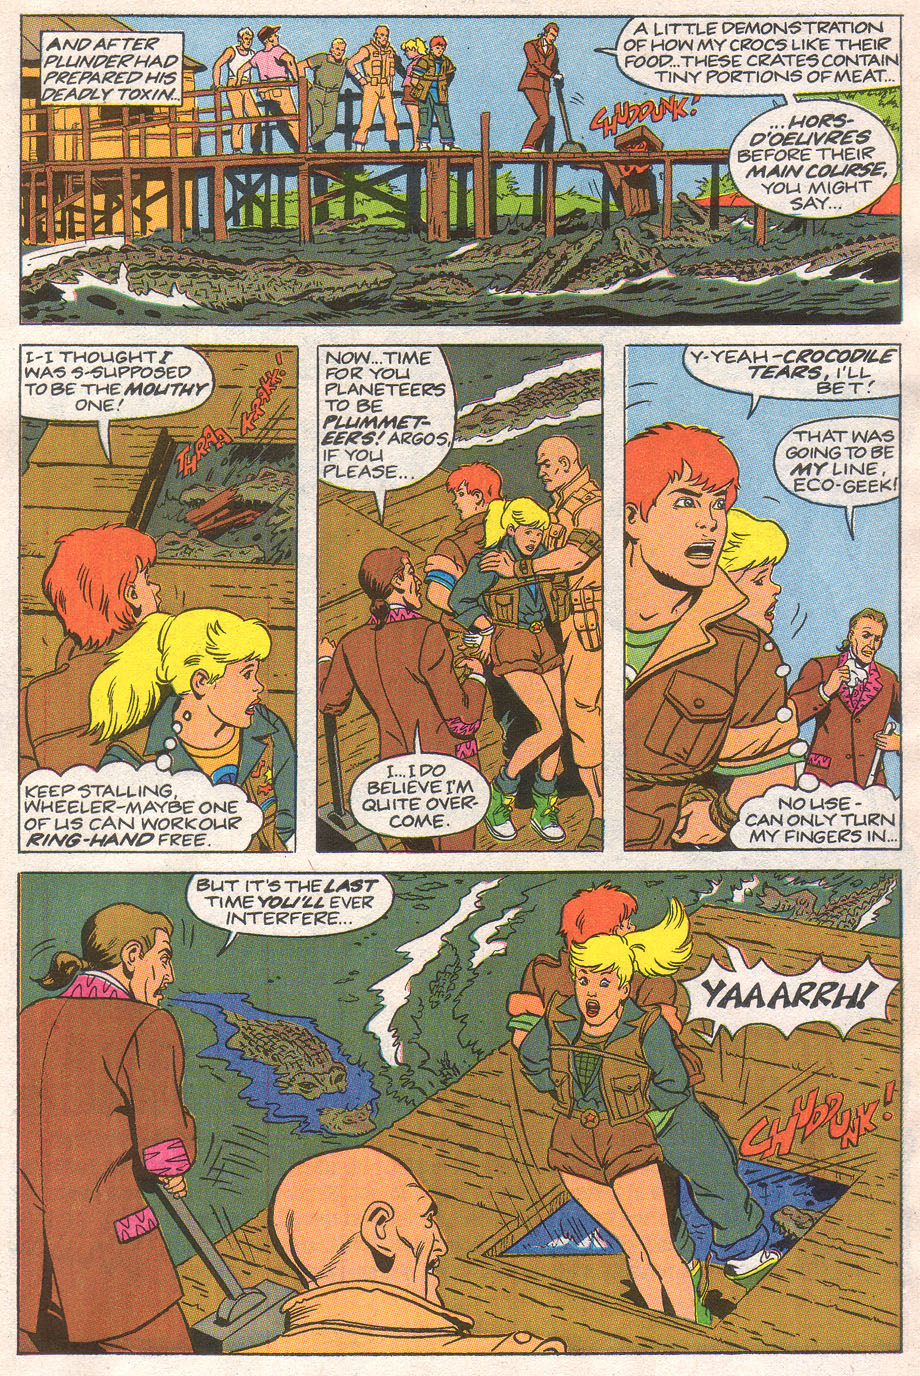 Captain Planet and the Planeteers 7 Page 26